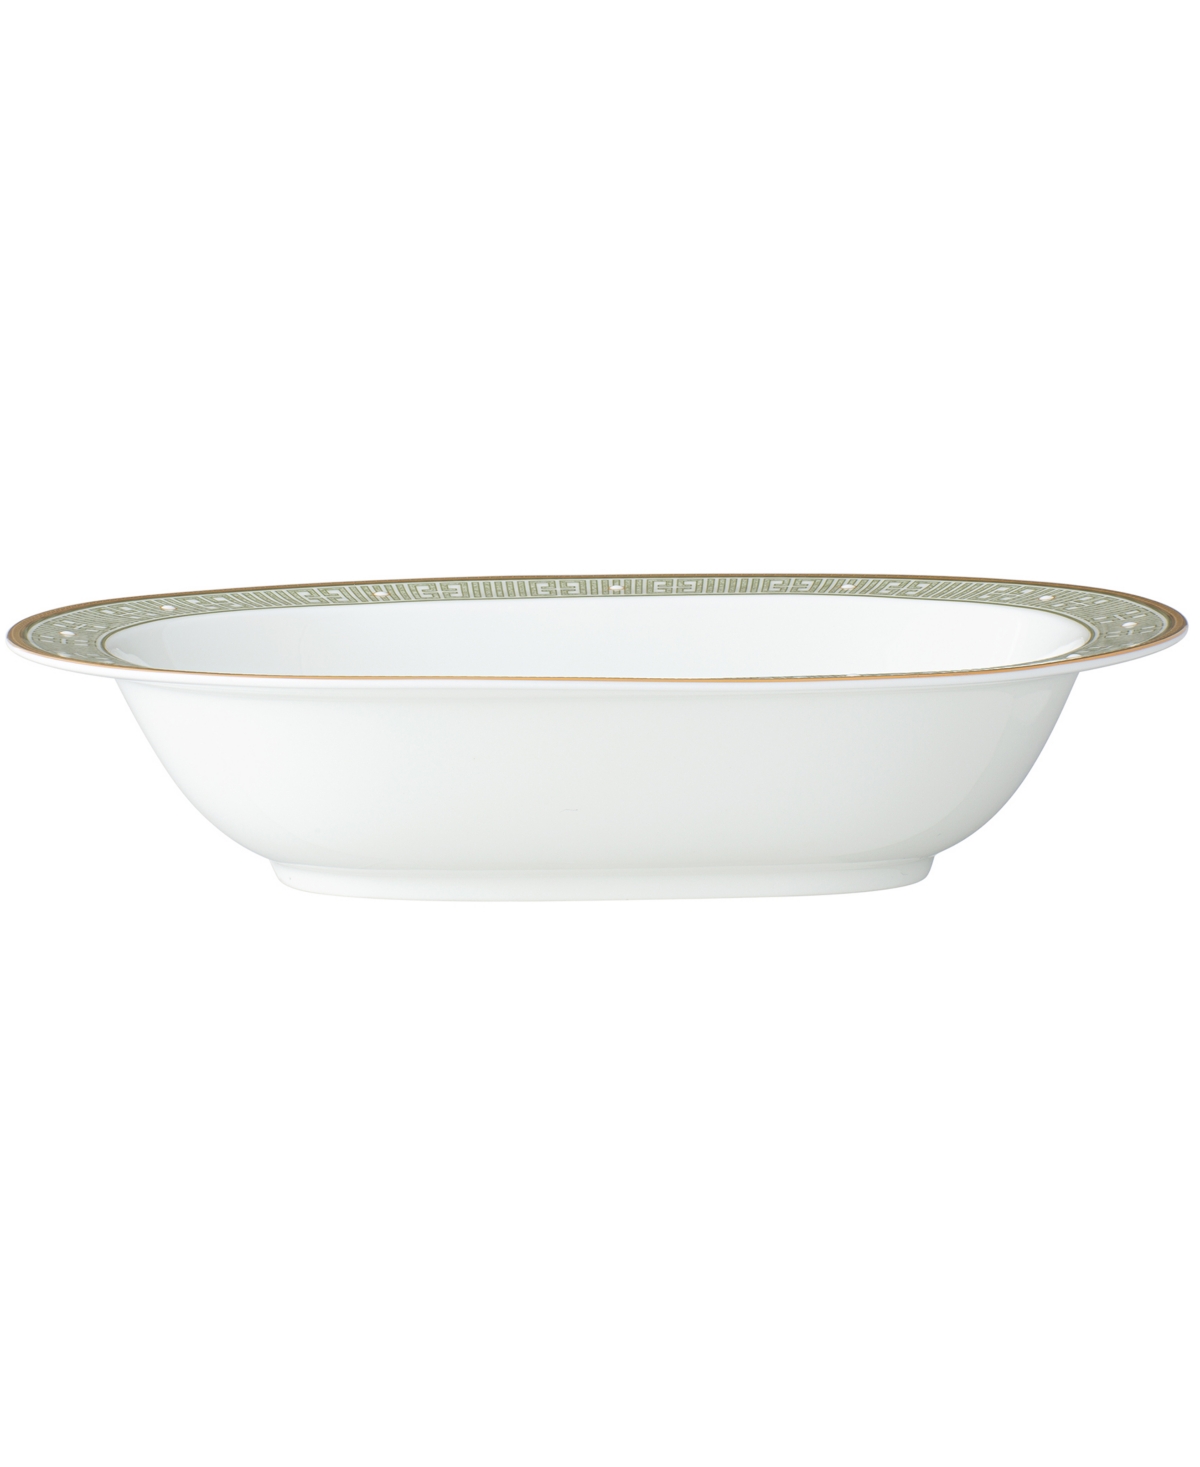 Noritake Infinity Oval Vegetable Bowl 24 oz In Green Gold